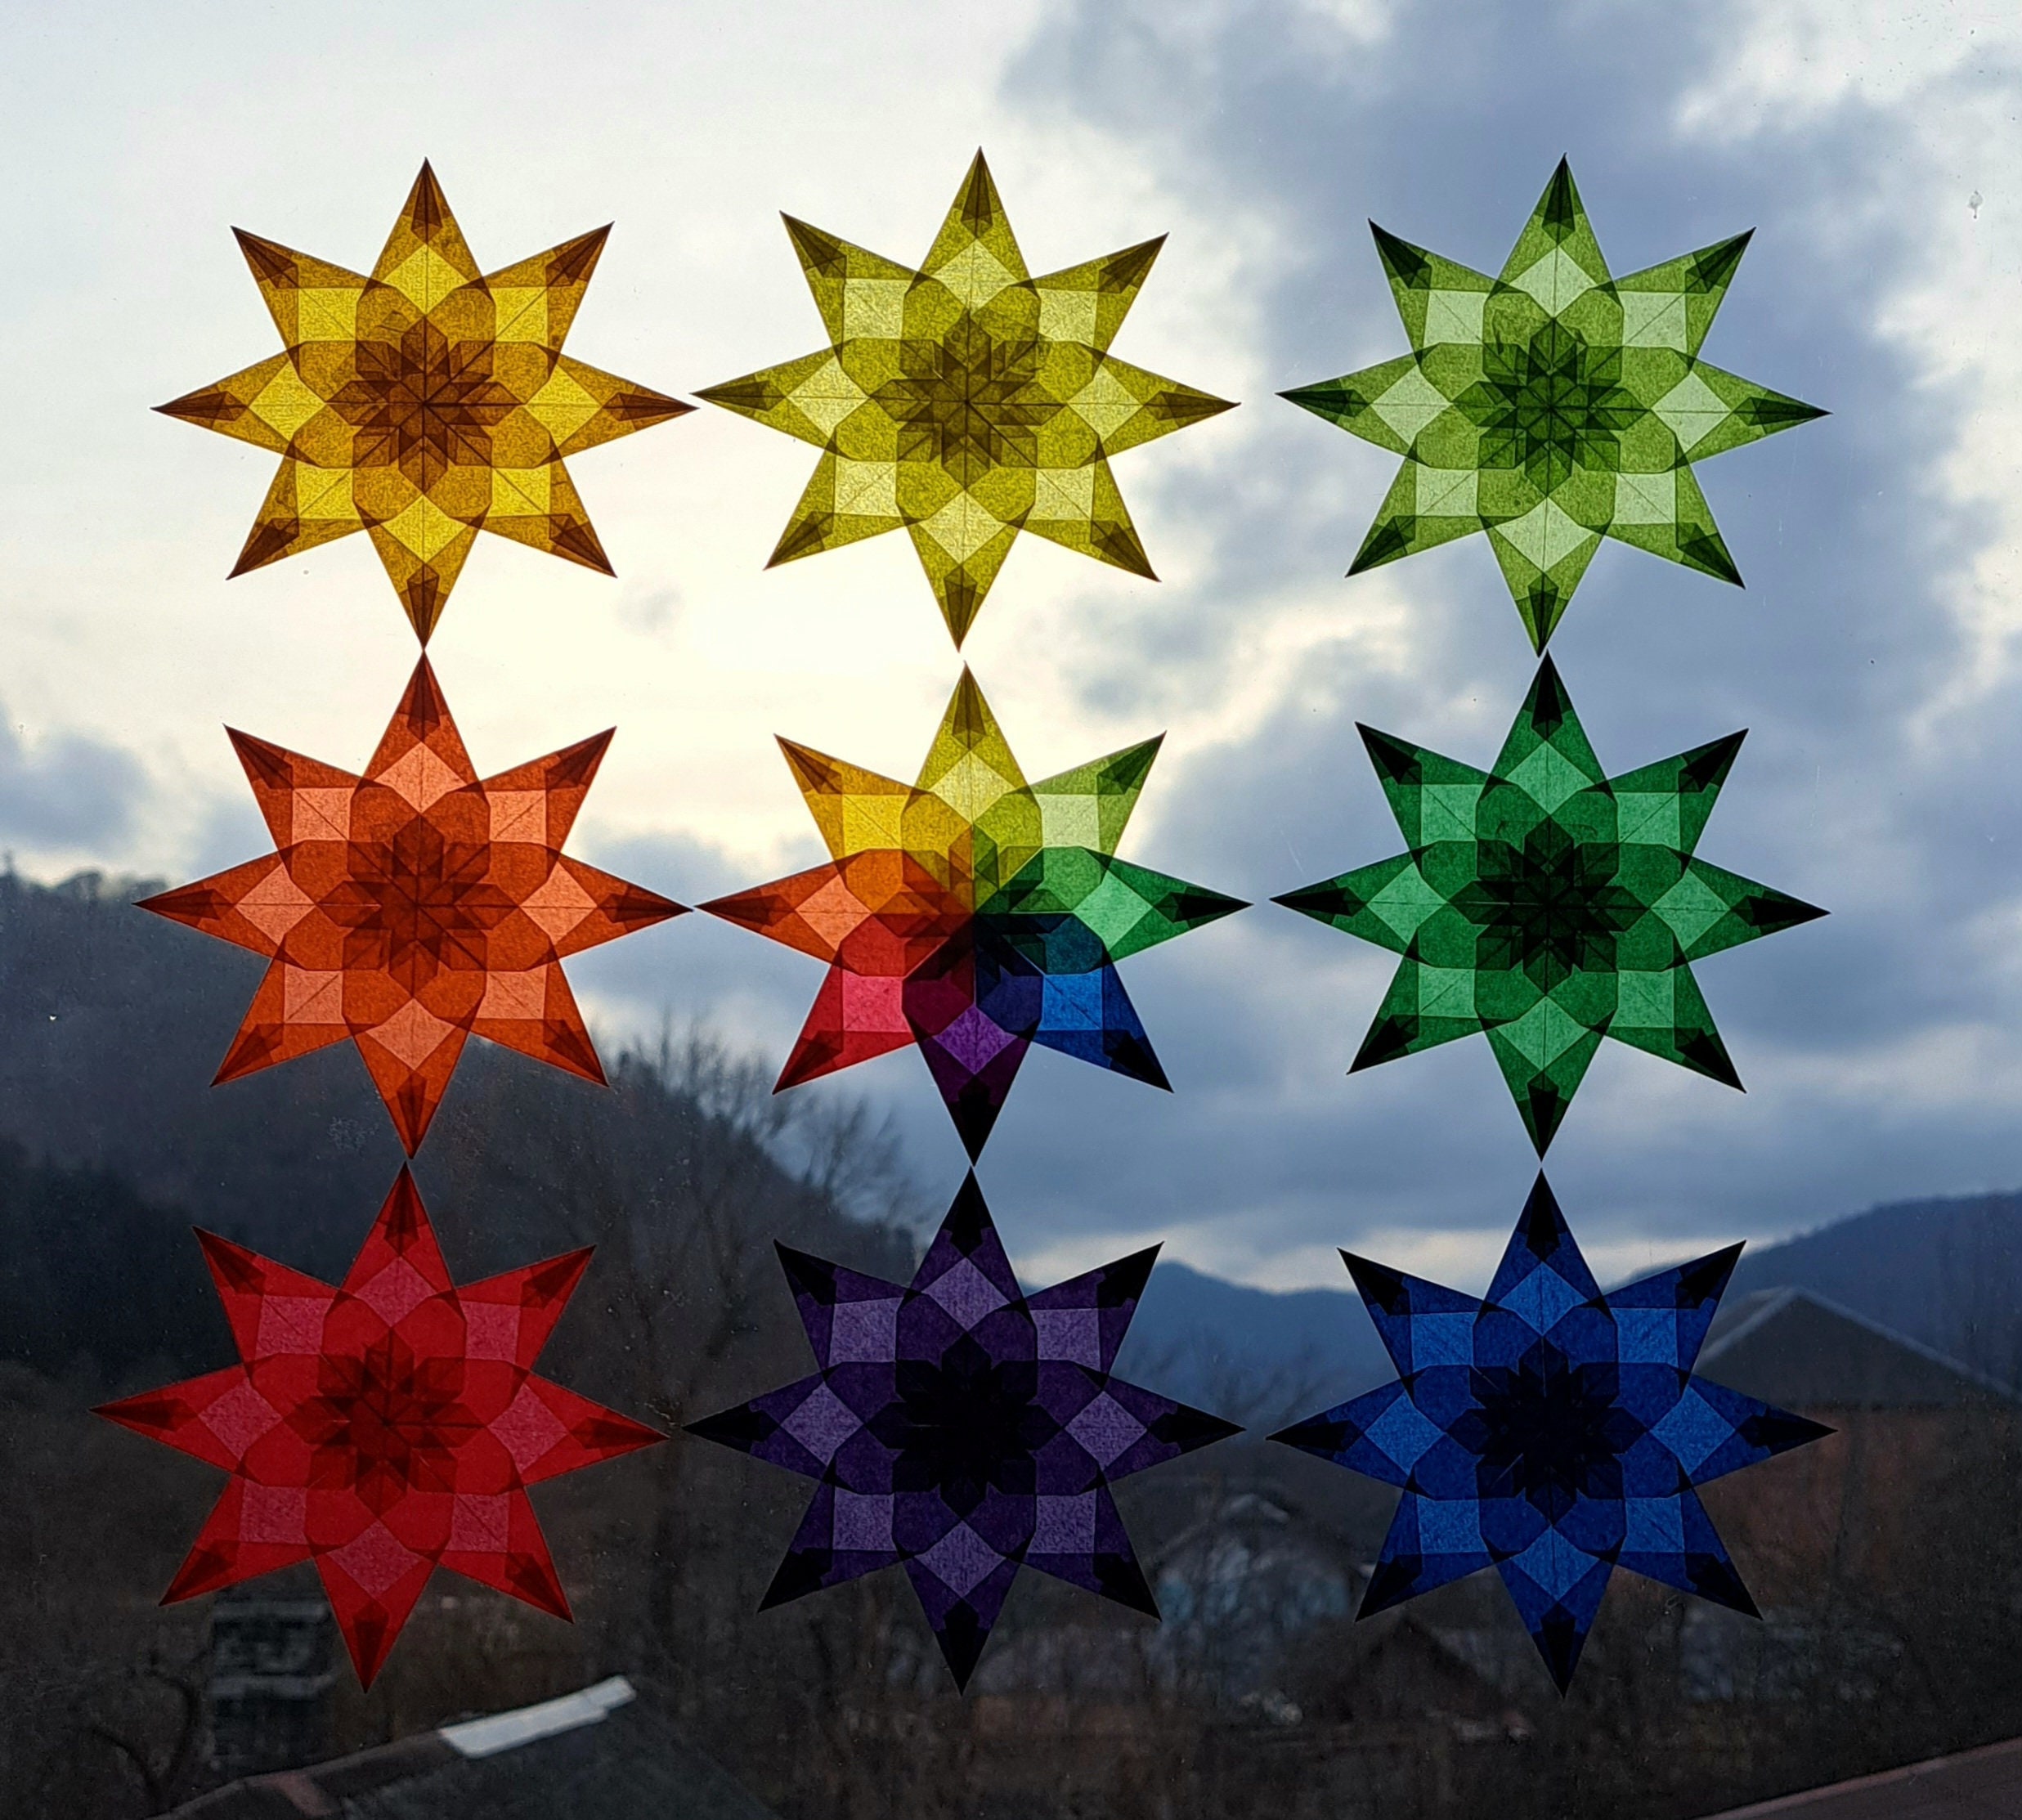 Translucent Or Kite Paper. Suitable For Making Window Stars Or Waldorf  Stars (8.5 X 8.5 Inch, 99 Sheets) 